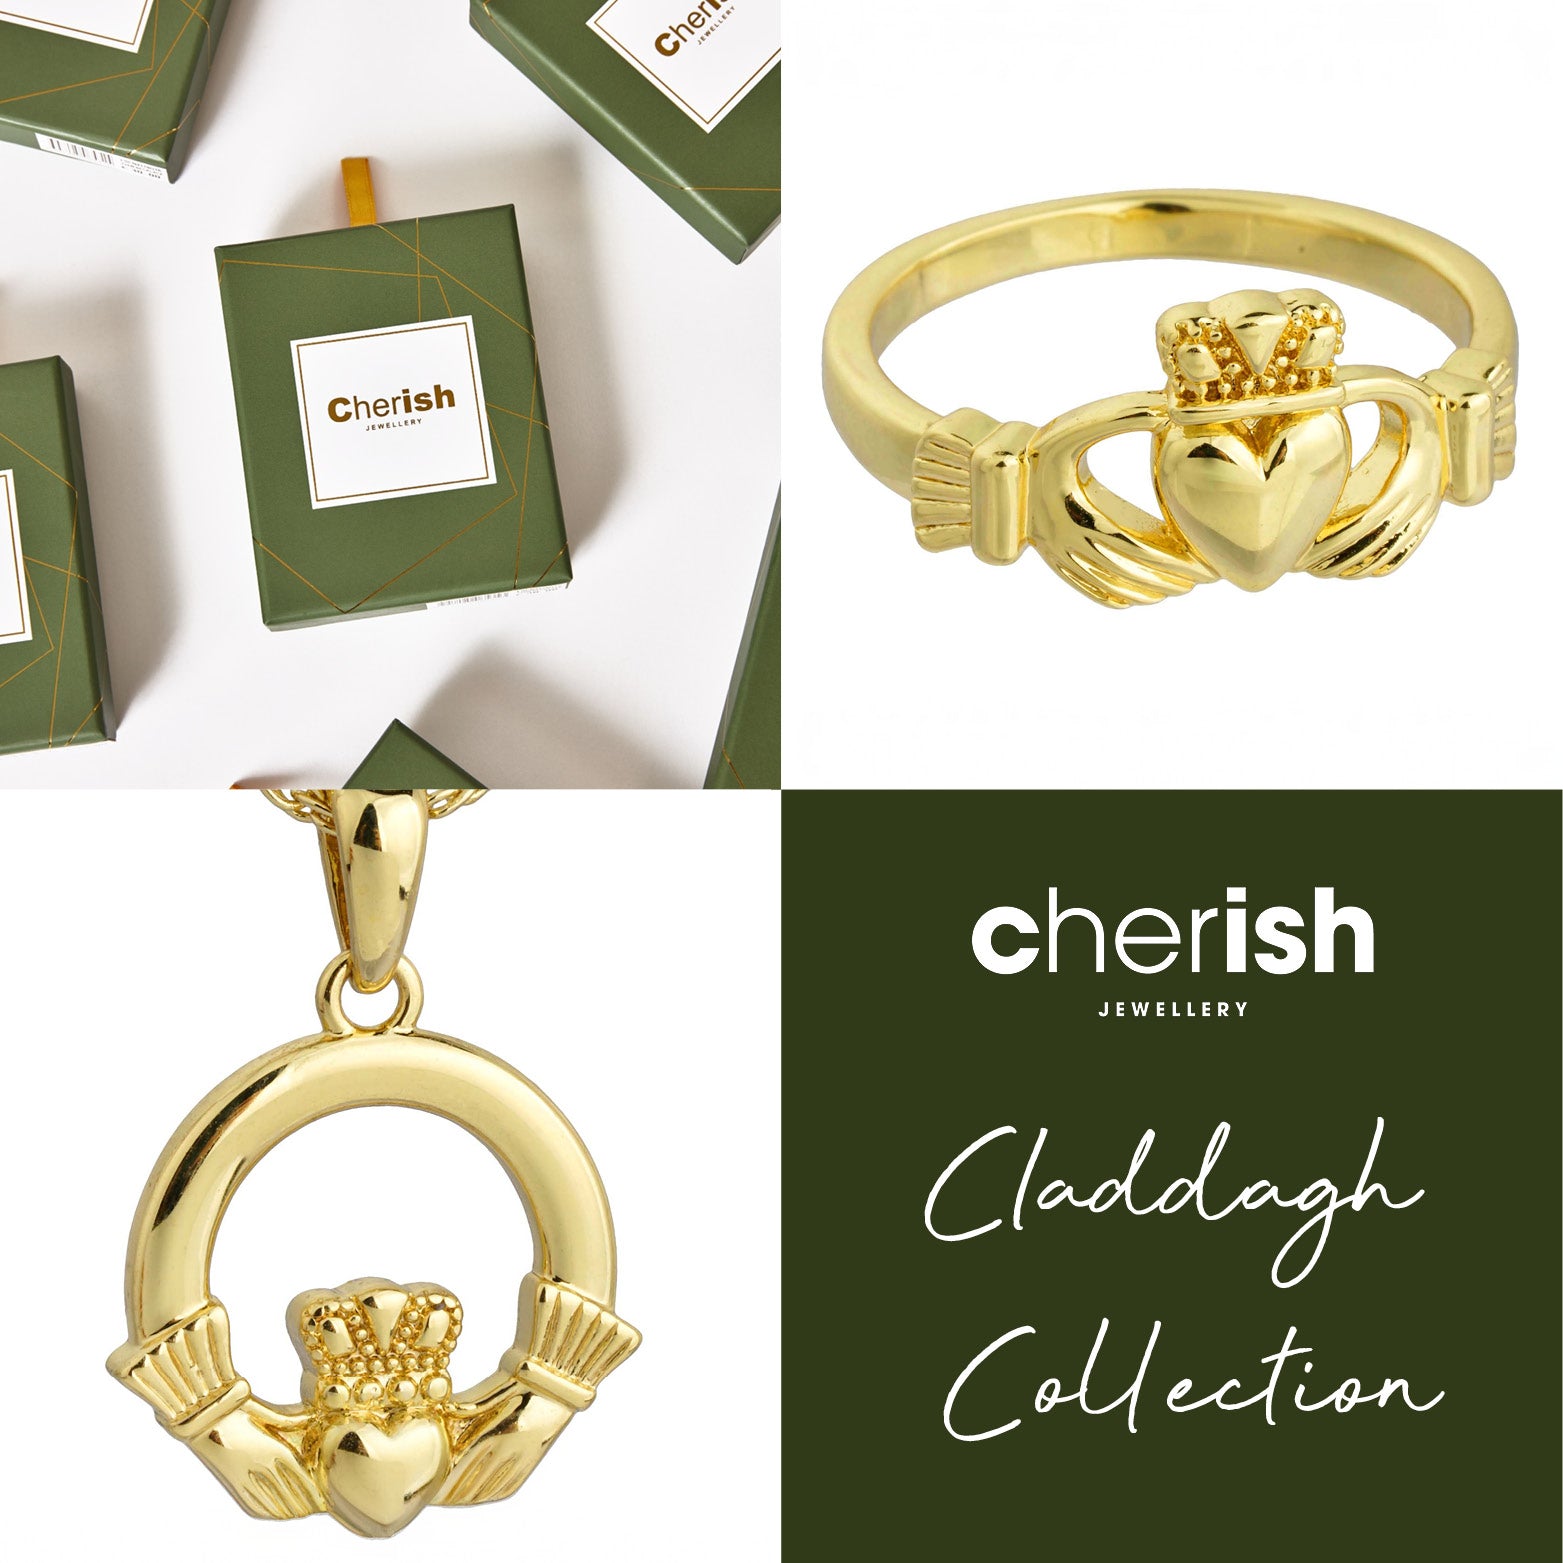 NEW Claddagh Collection